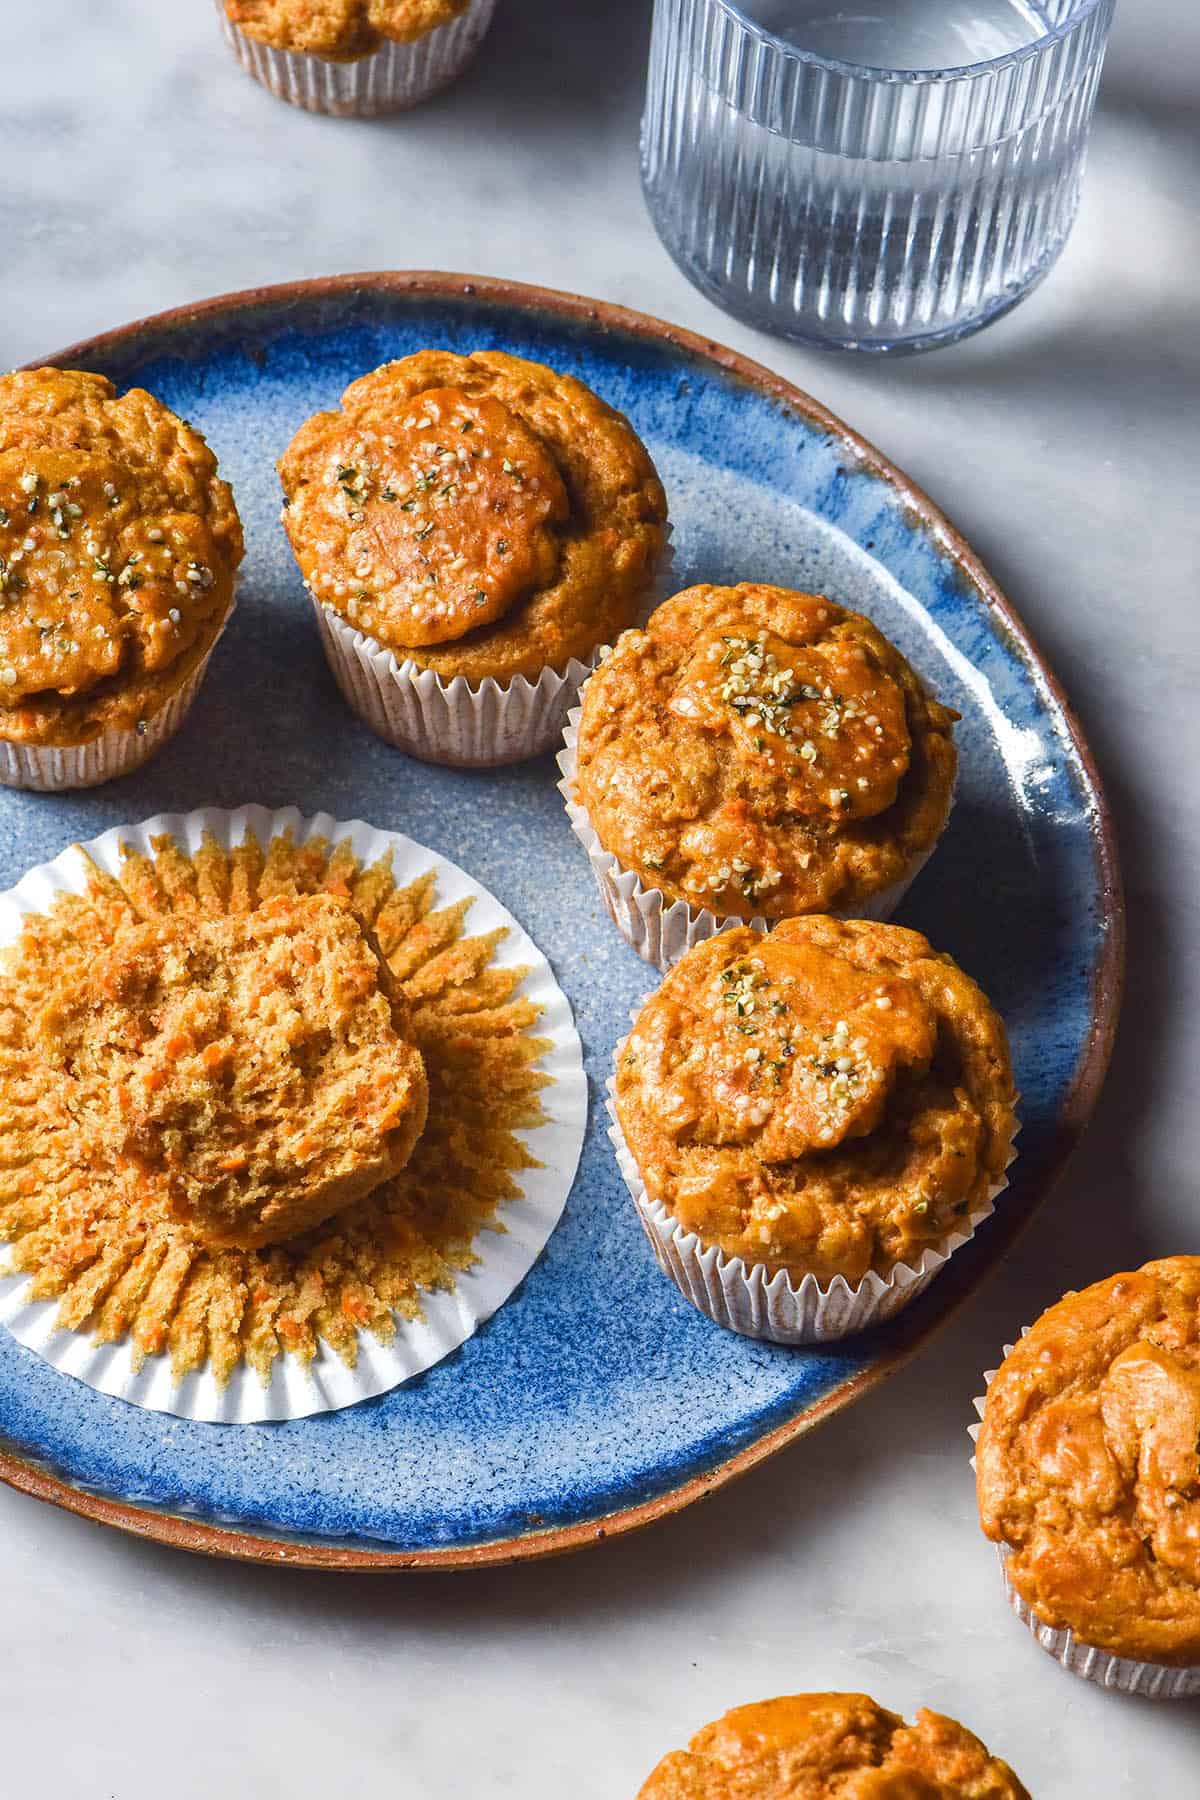 An aerial view of gluten free banana carrot muffins on a bright blue ceramic plate atop a white marble table. The muffins are casually arranged and a water glass sits to the top right of the image.